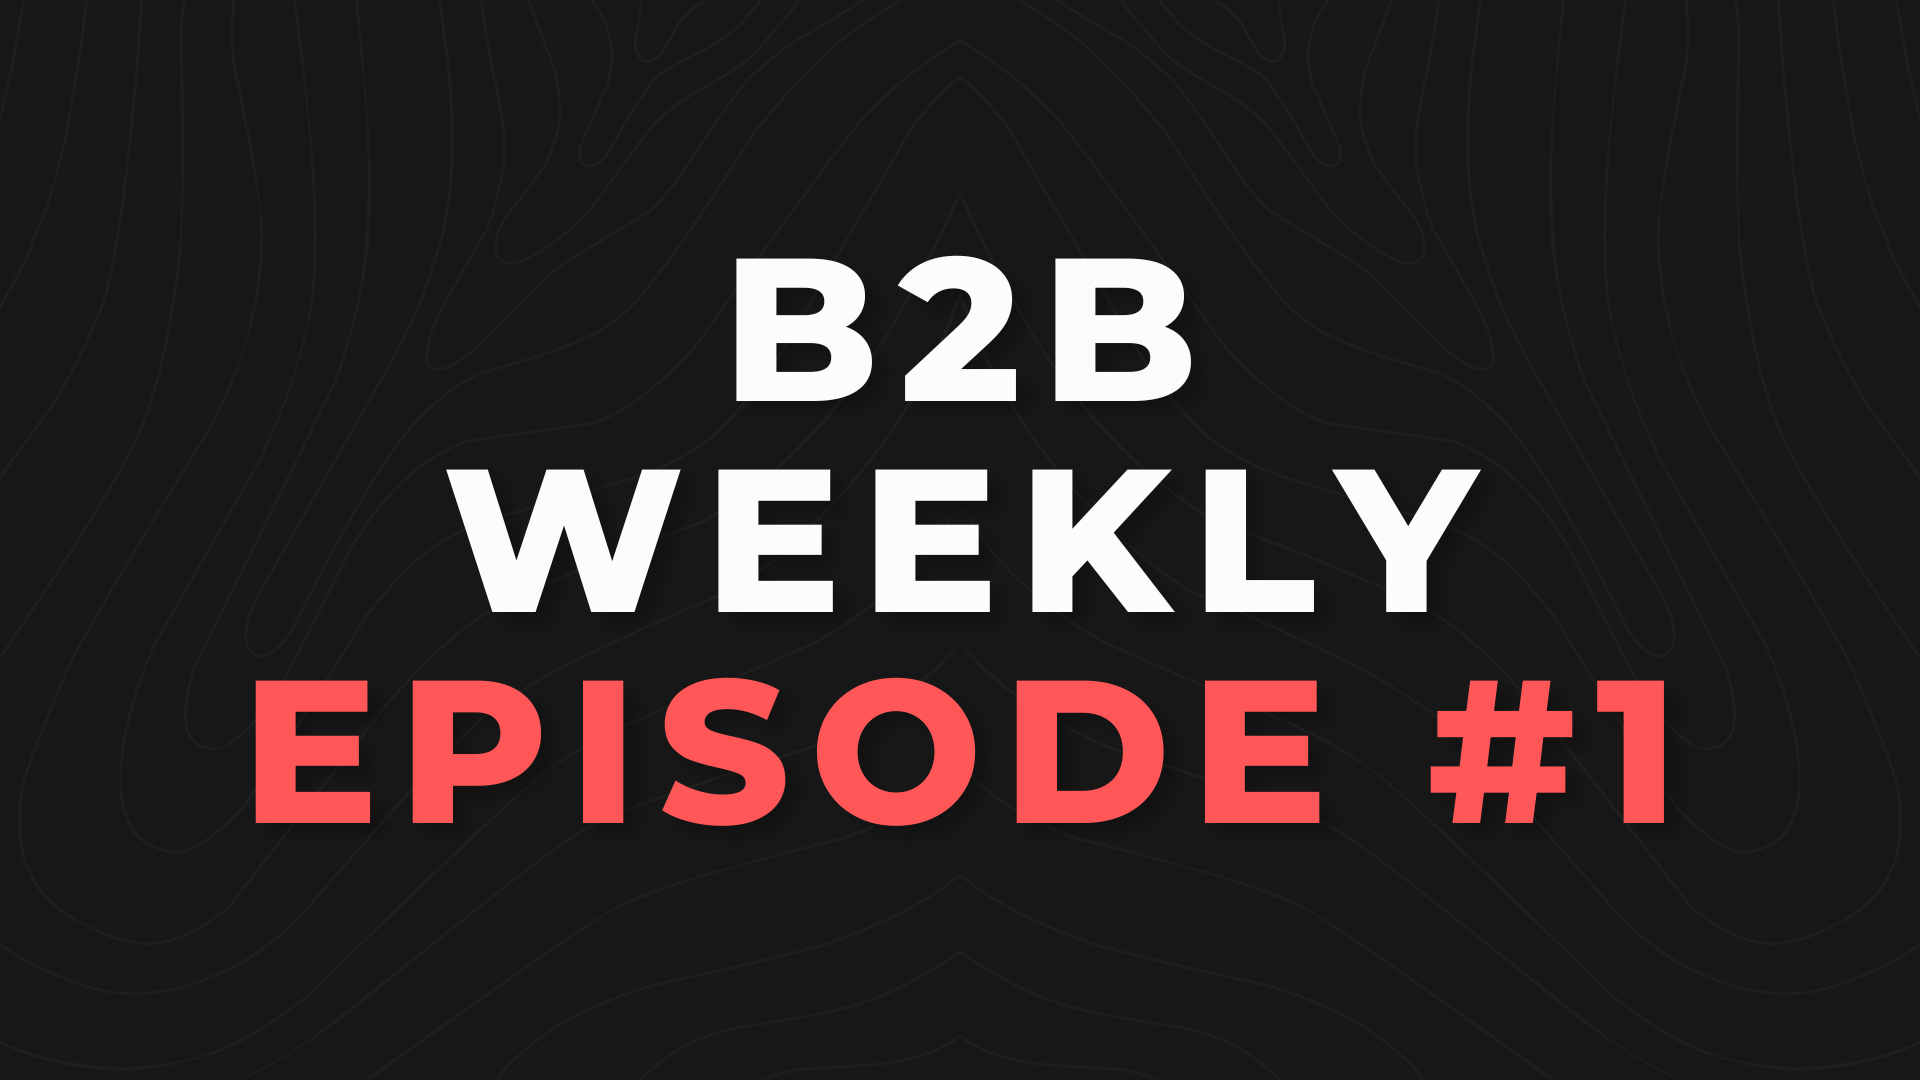 What marketers are doing wrong with Social Selling - B2B Weekly w/ Nemanja and Marti